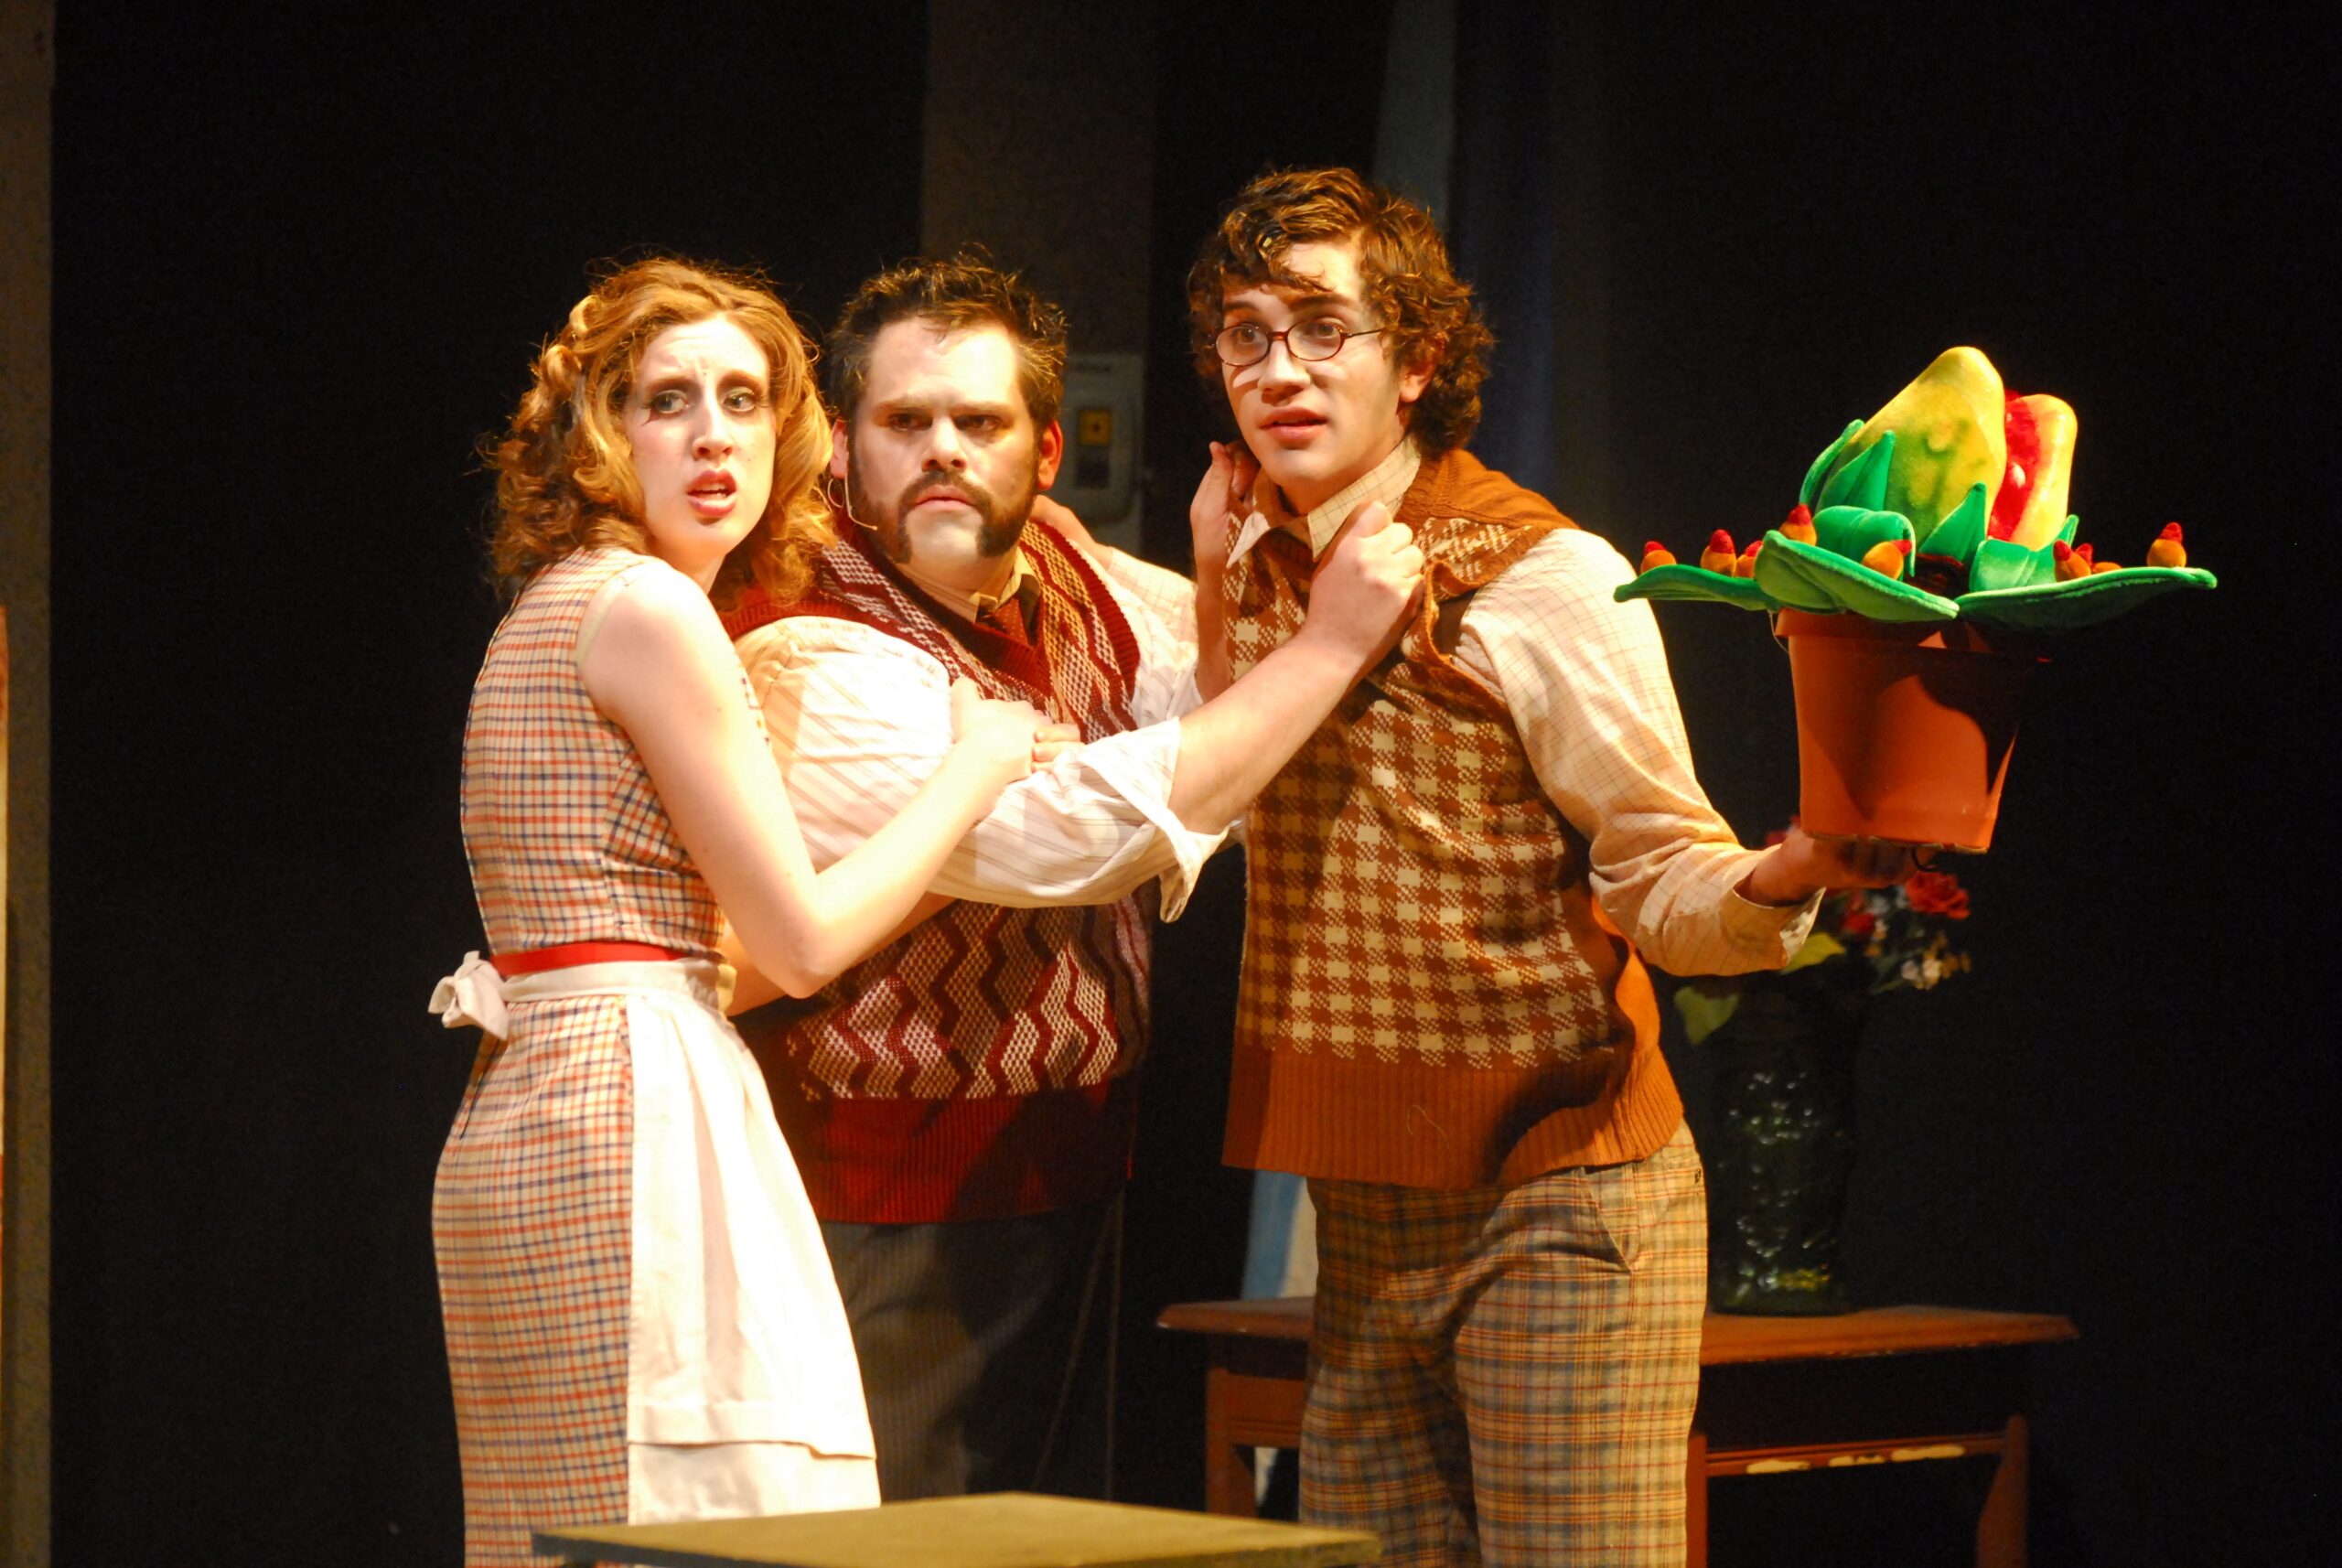 Three actors performing in Little Shop of Horrors, dressed in costume. One holds a carnivorous plant prop.